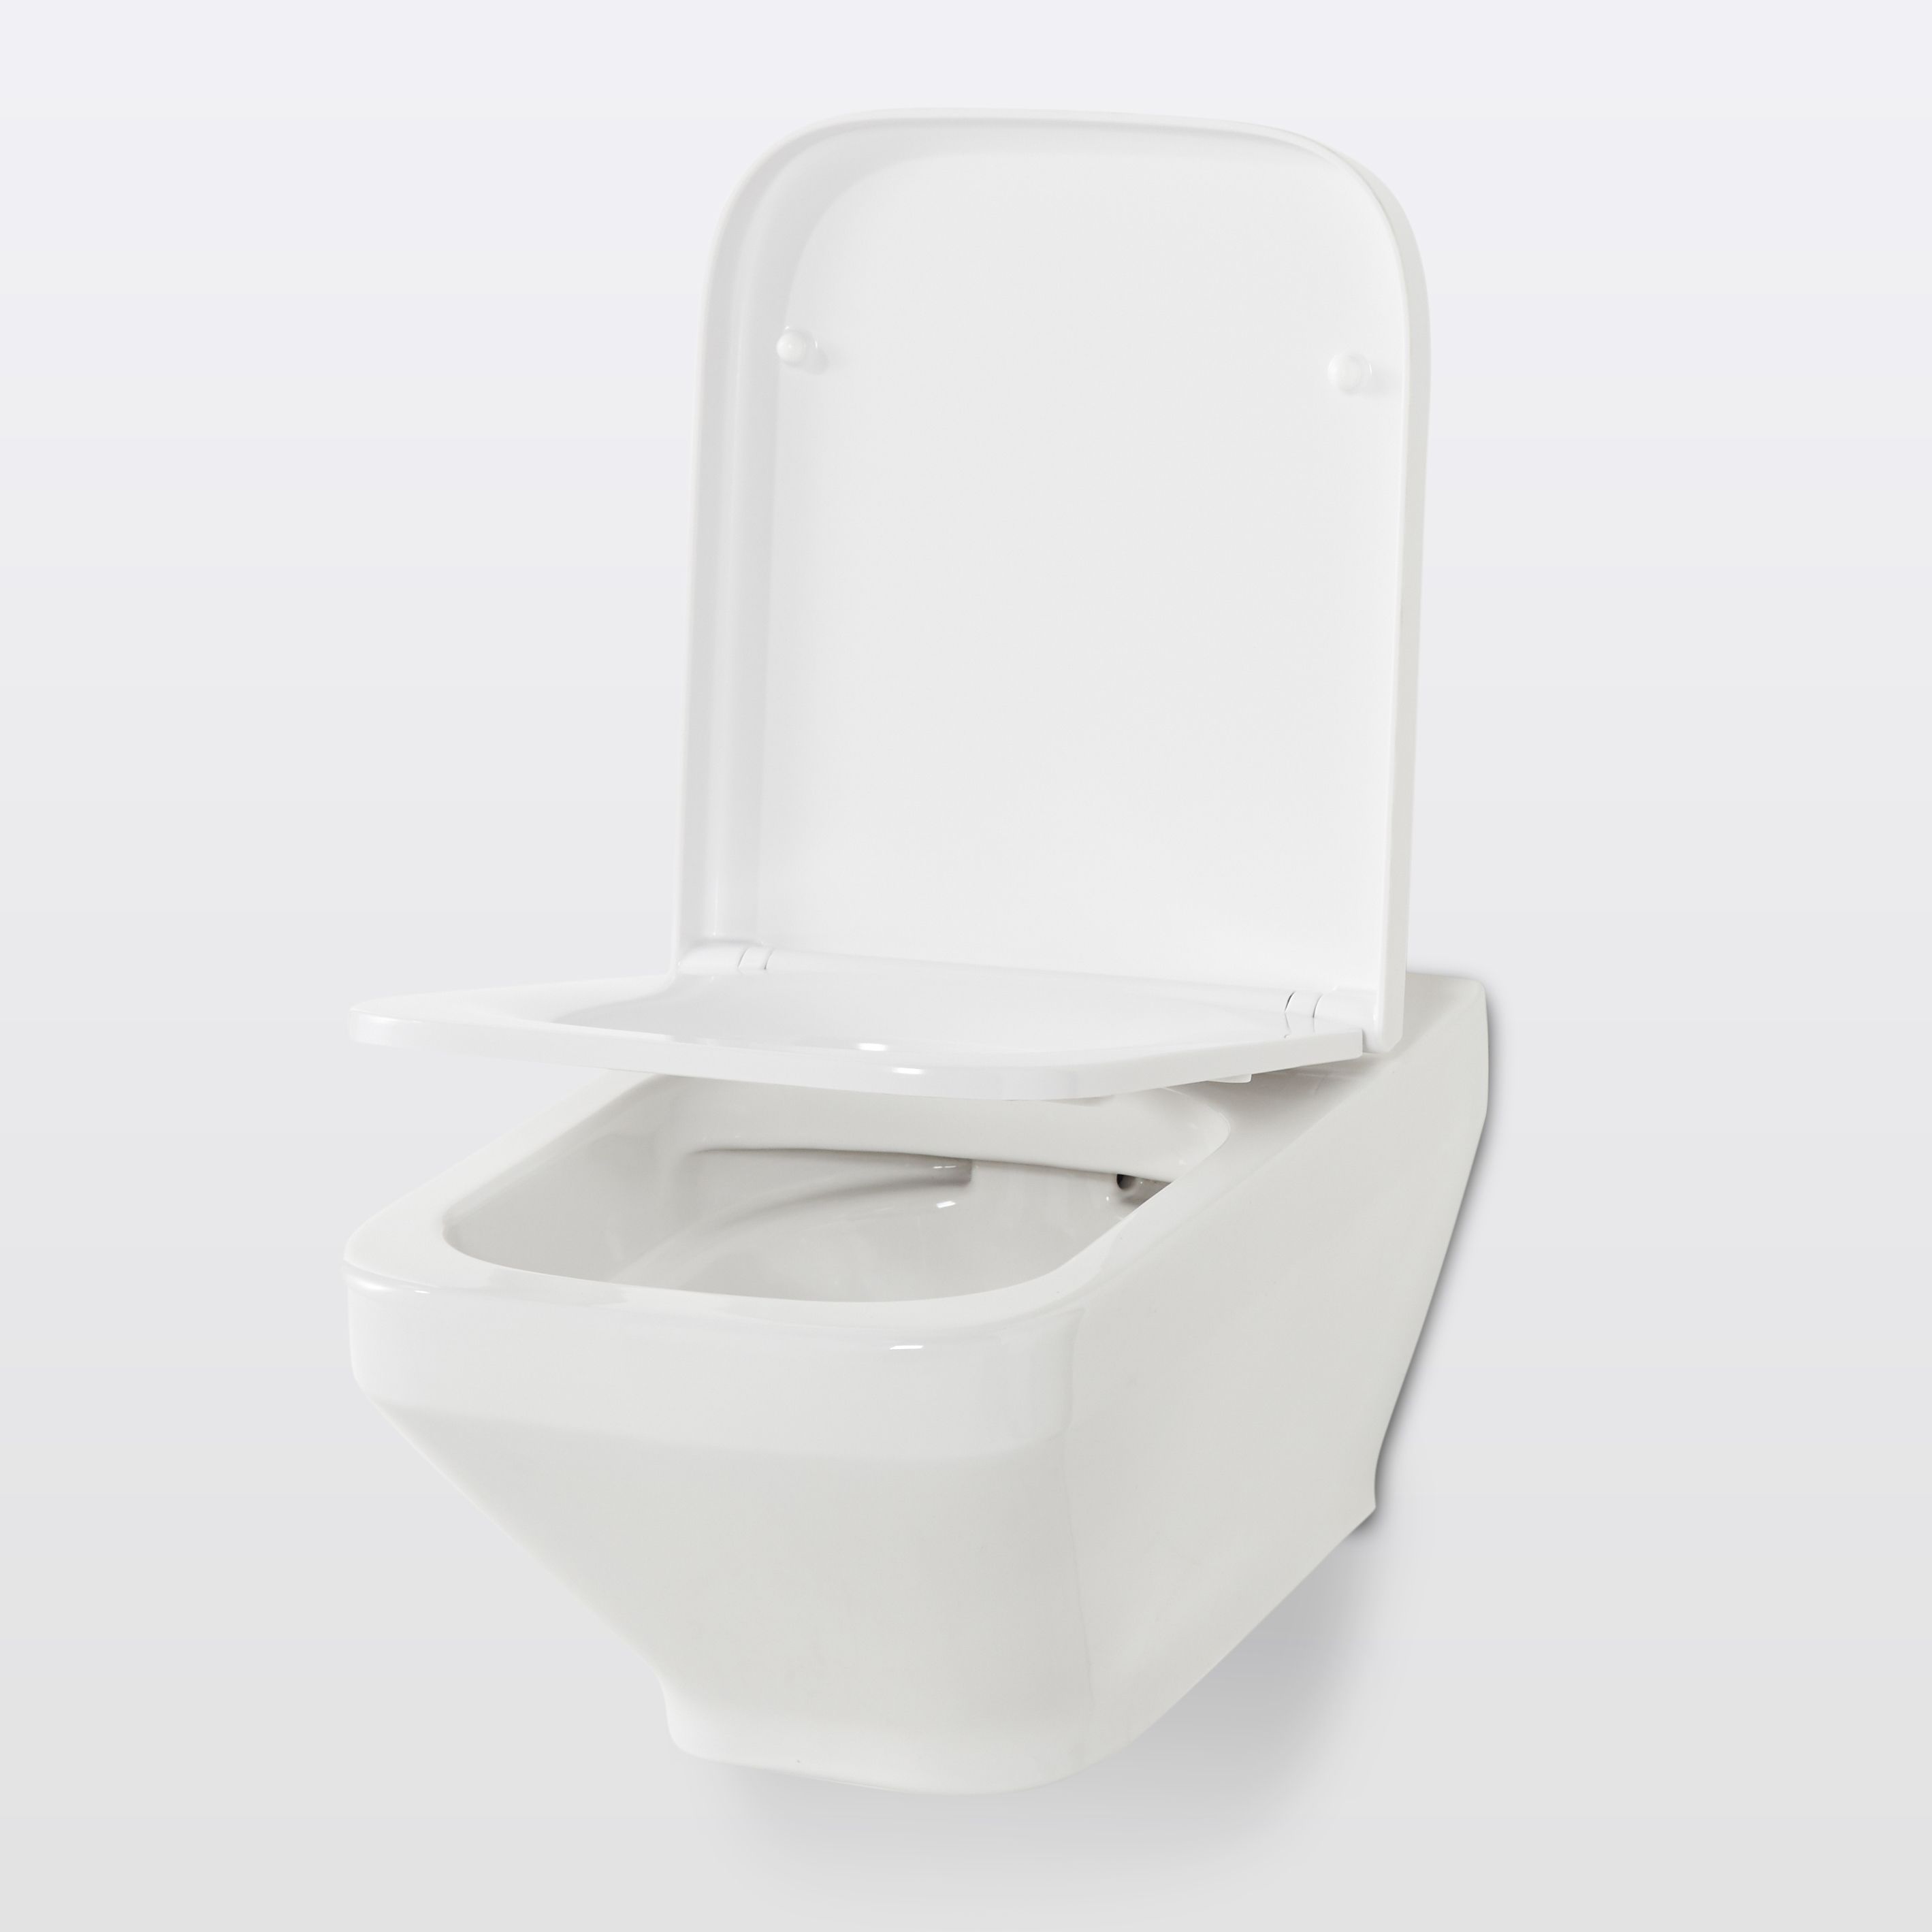 GoodHome Teesta White Wall hung Toilet with Soft close seat